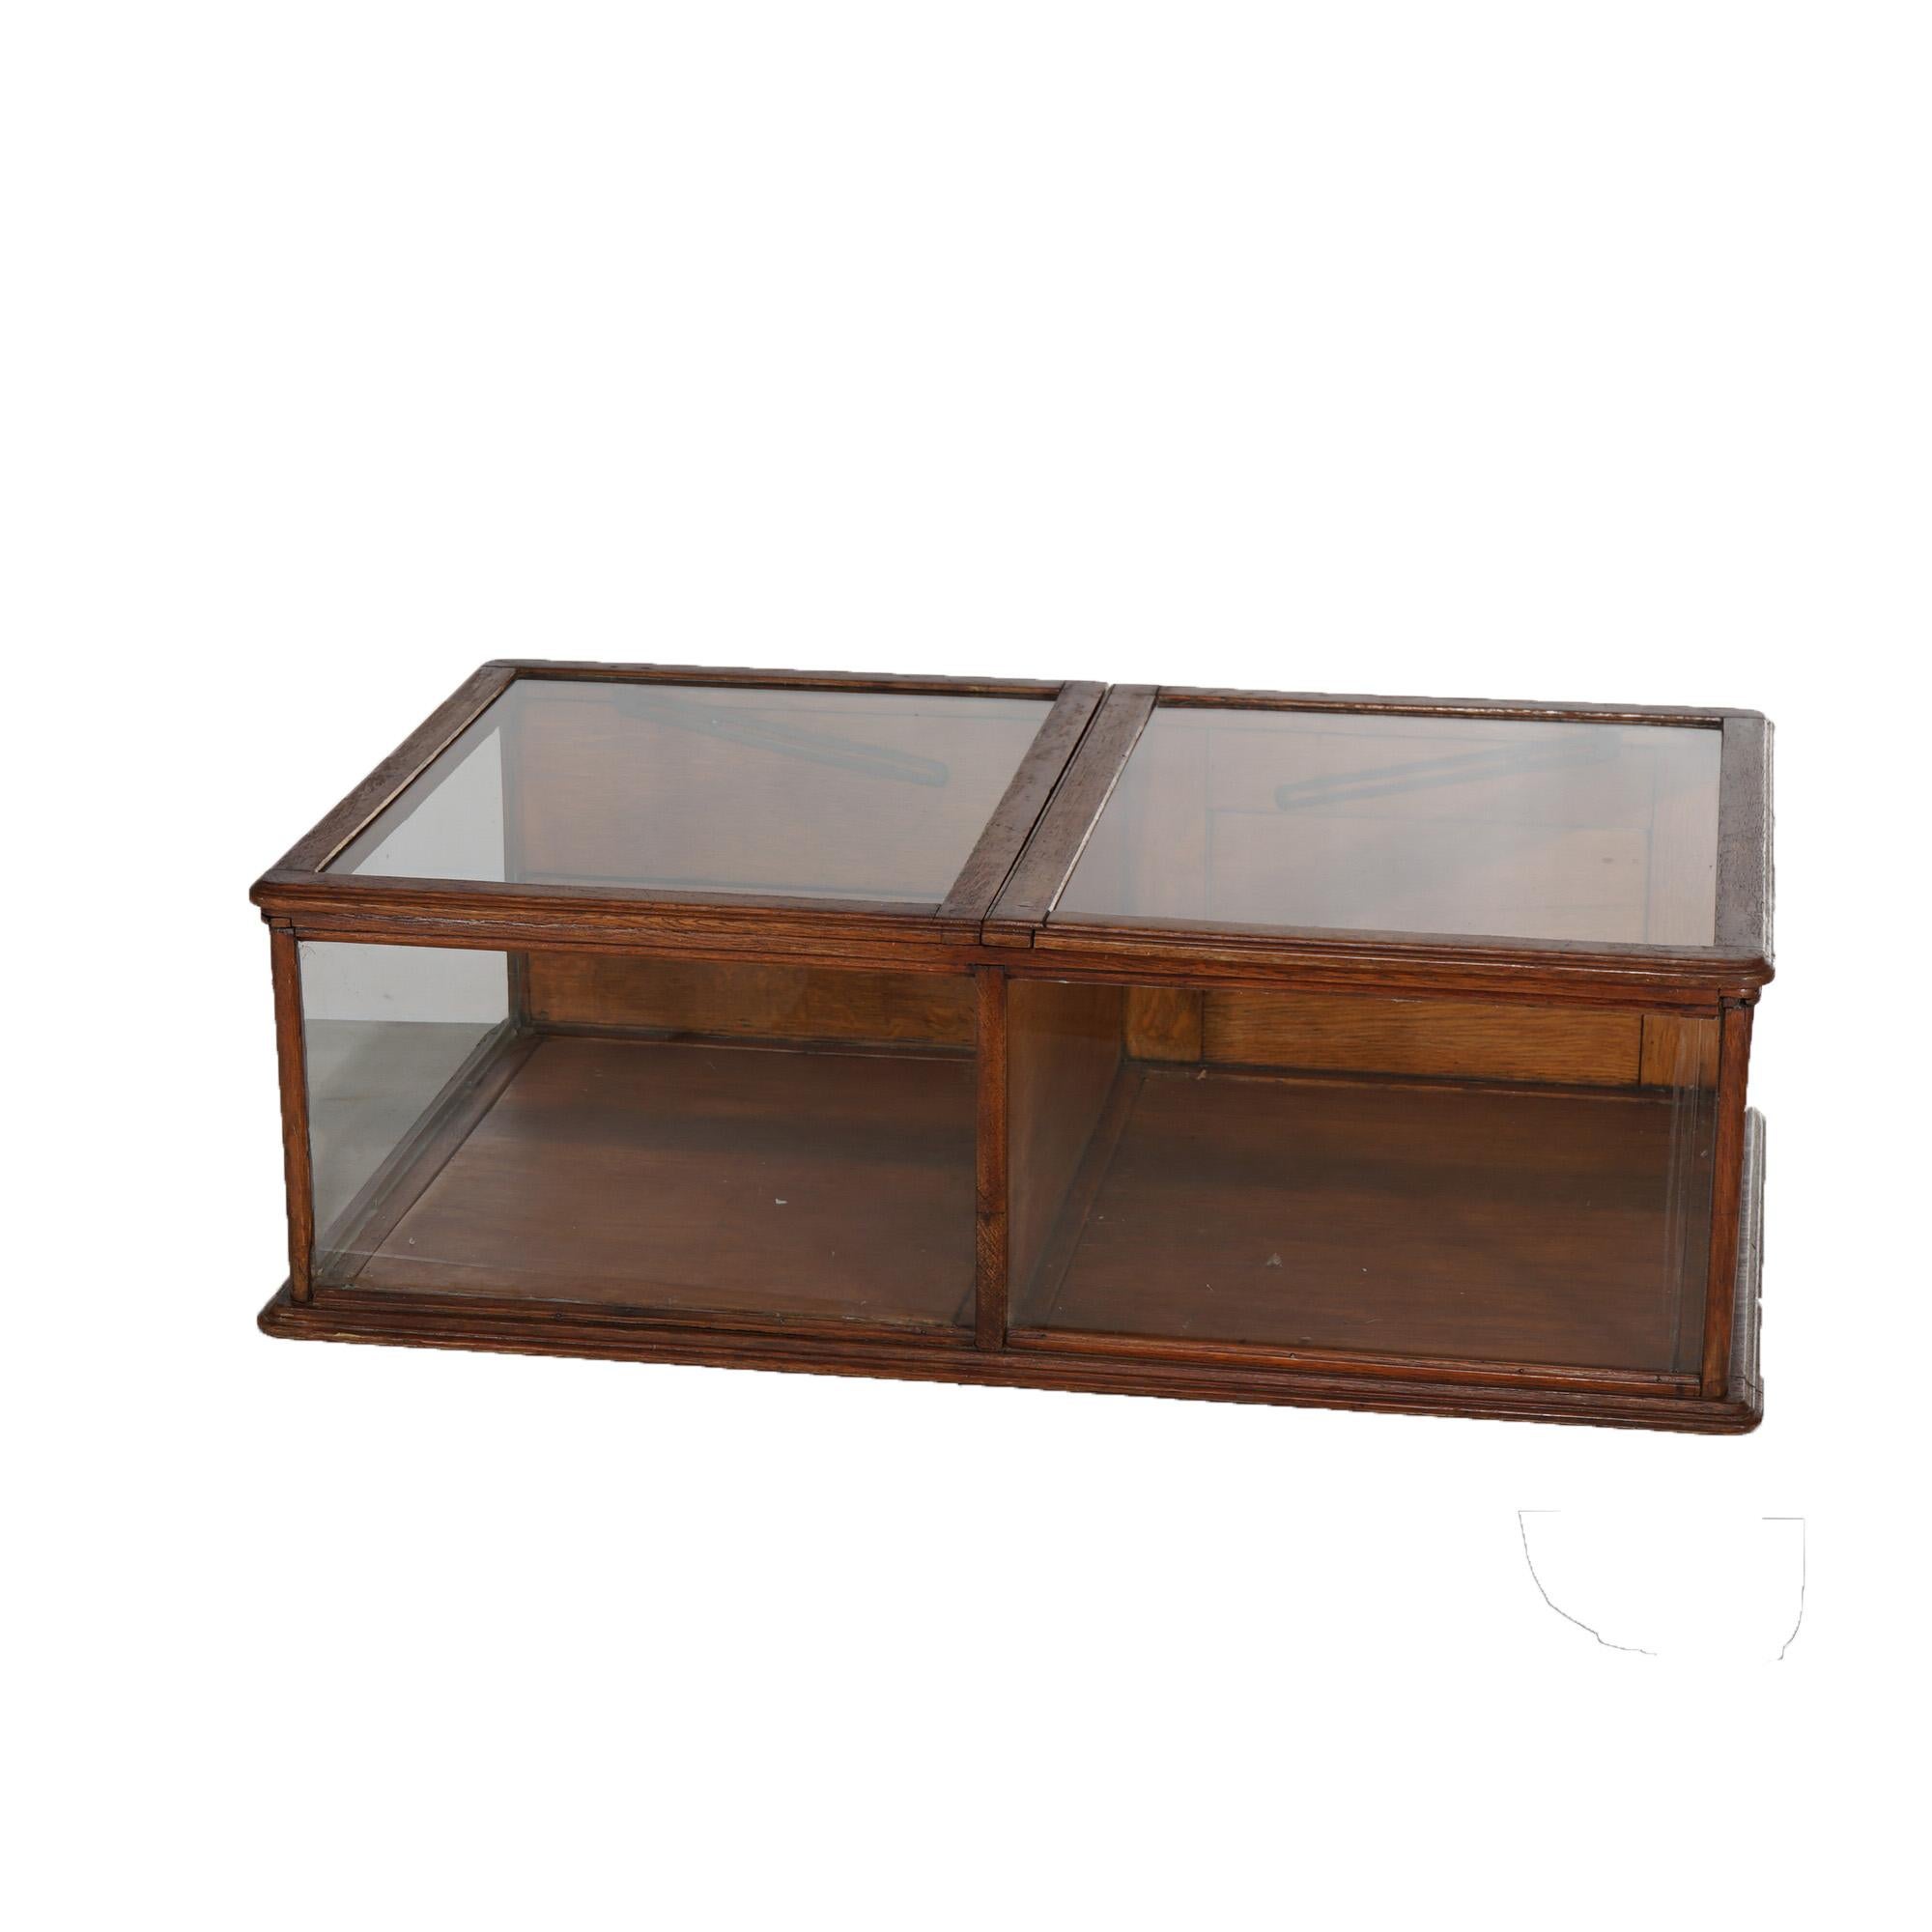 Antique Country Store Double Flip-Top Access Table-Top Oak & Glass Display Case C1900

Measures - 12.5